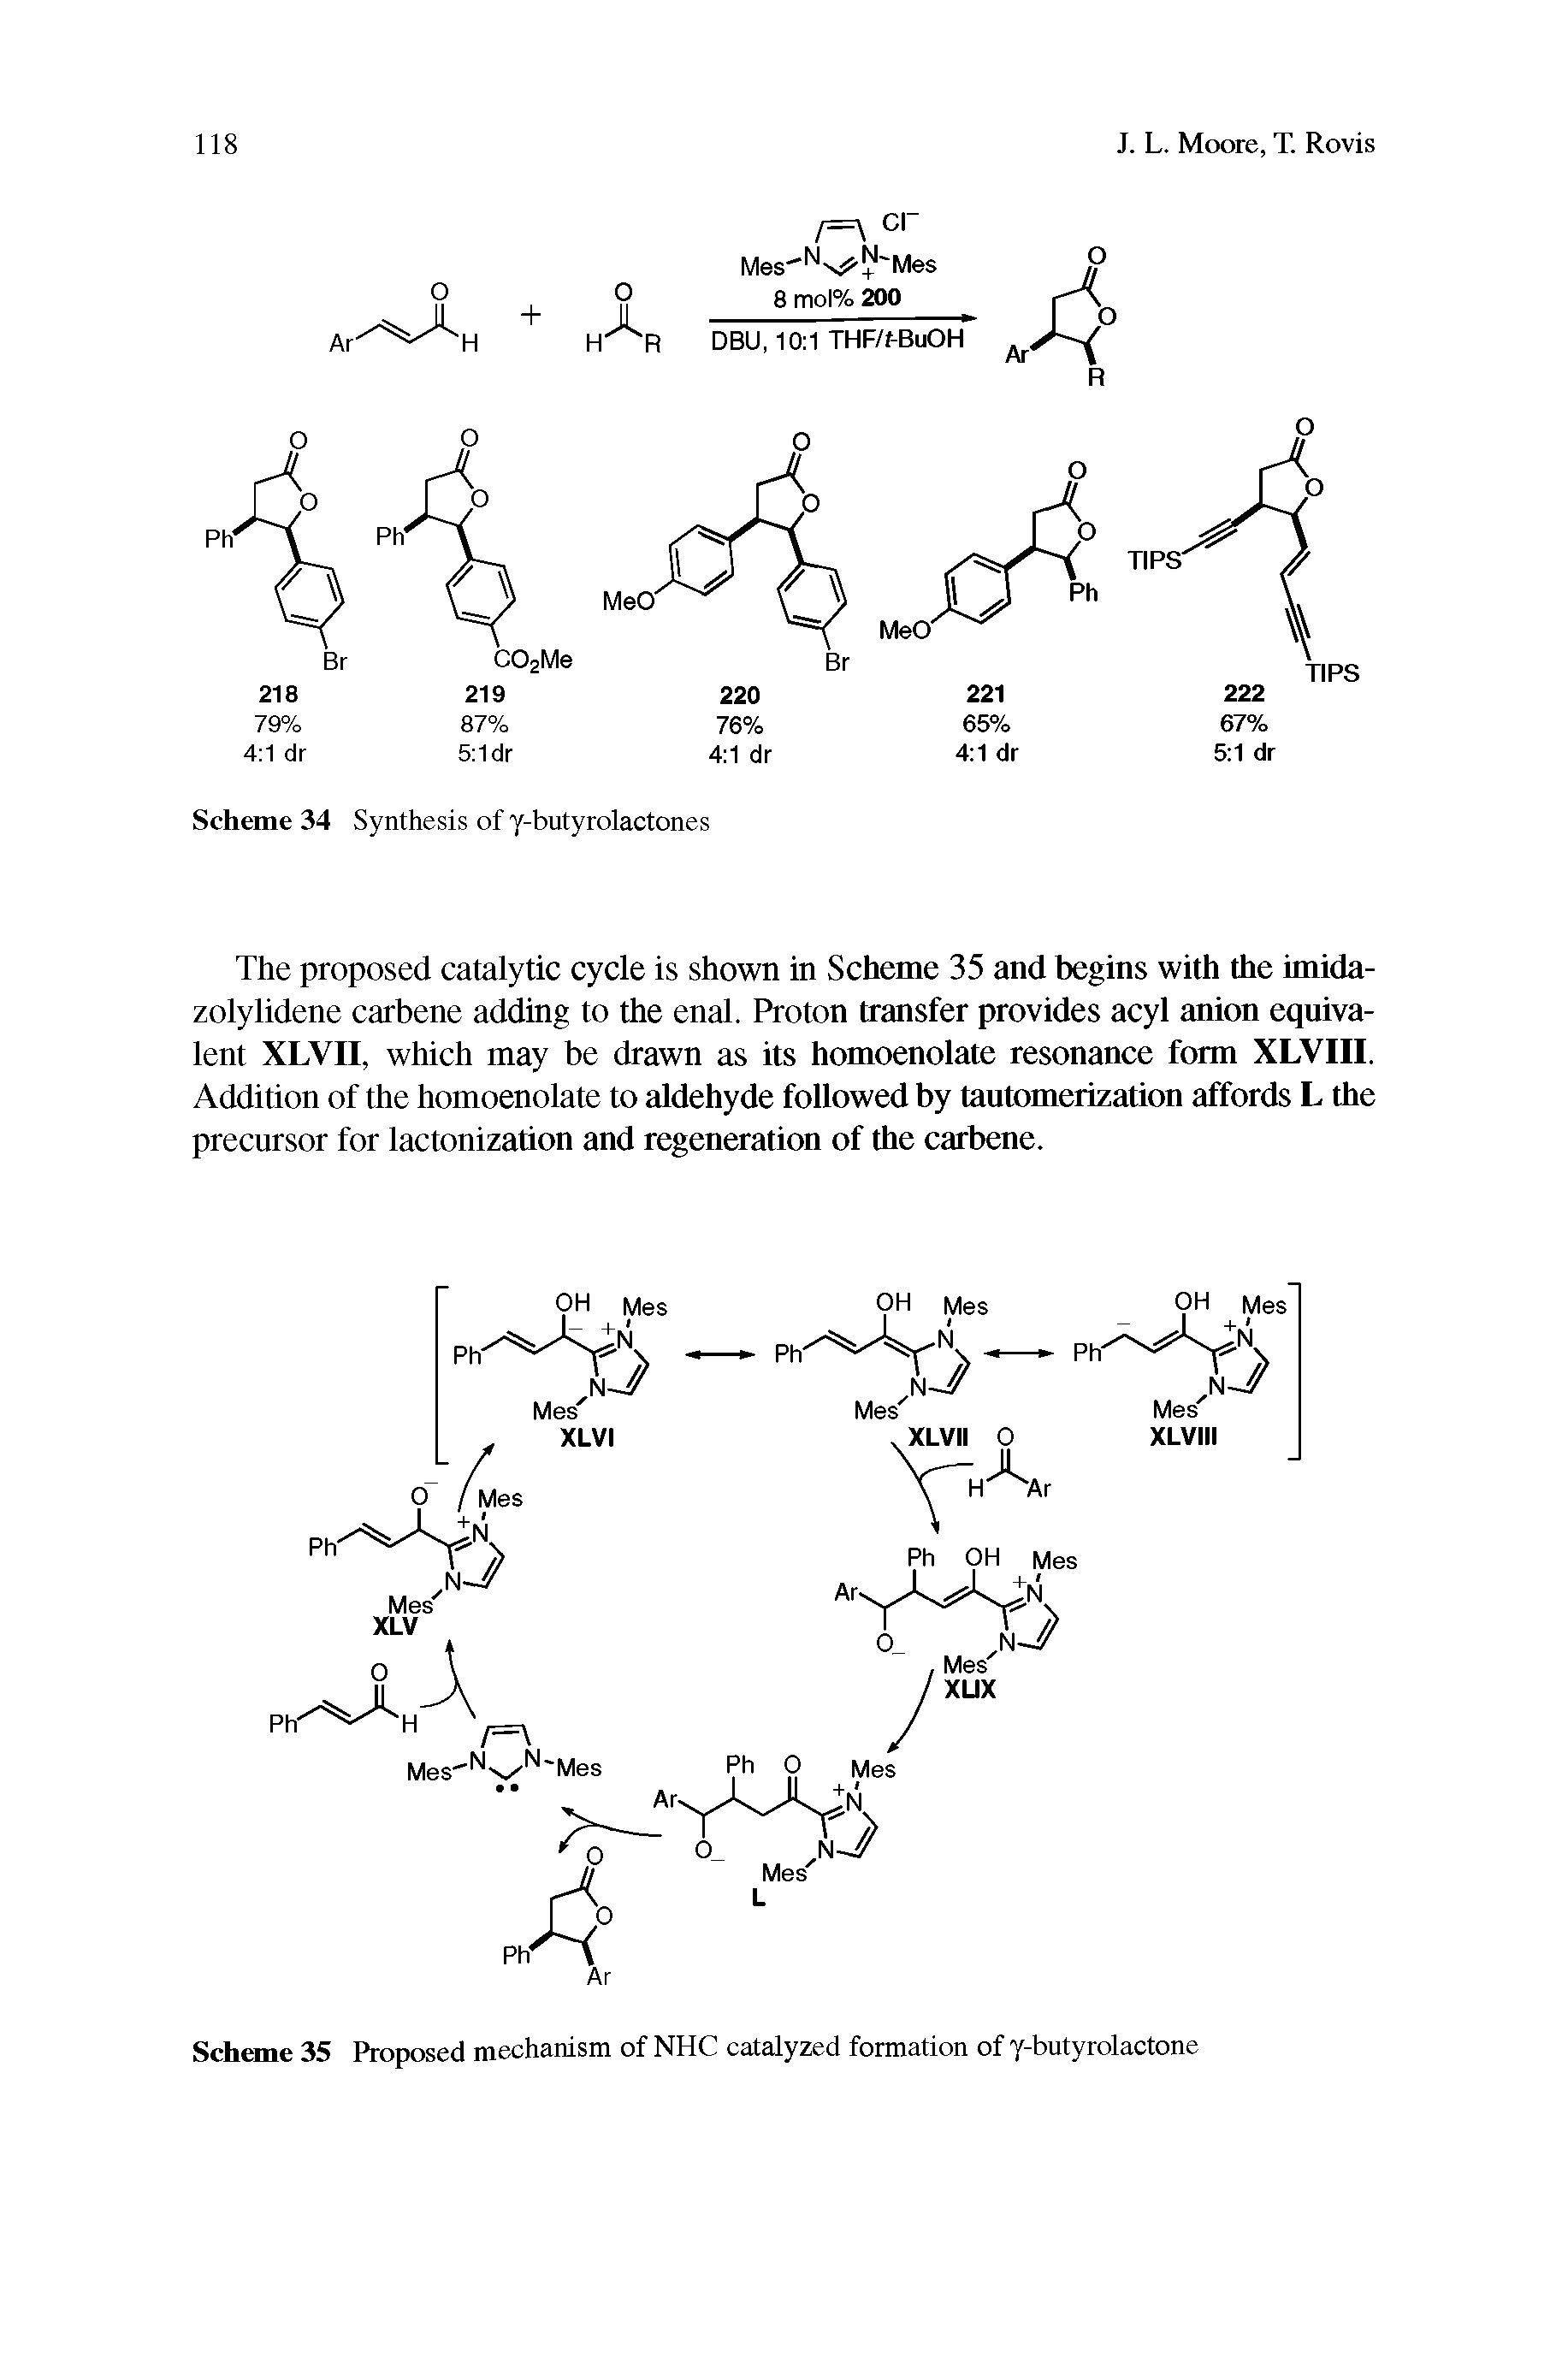 Scheme 35 Proposed mechanism of NHC catalyzed formation of y-butyrolactone...